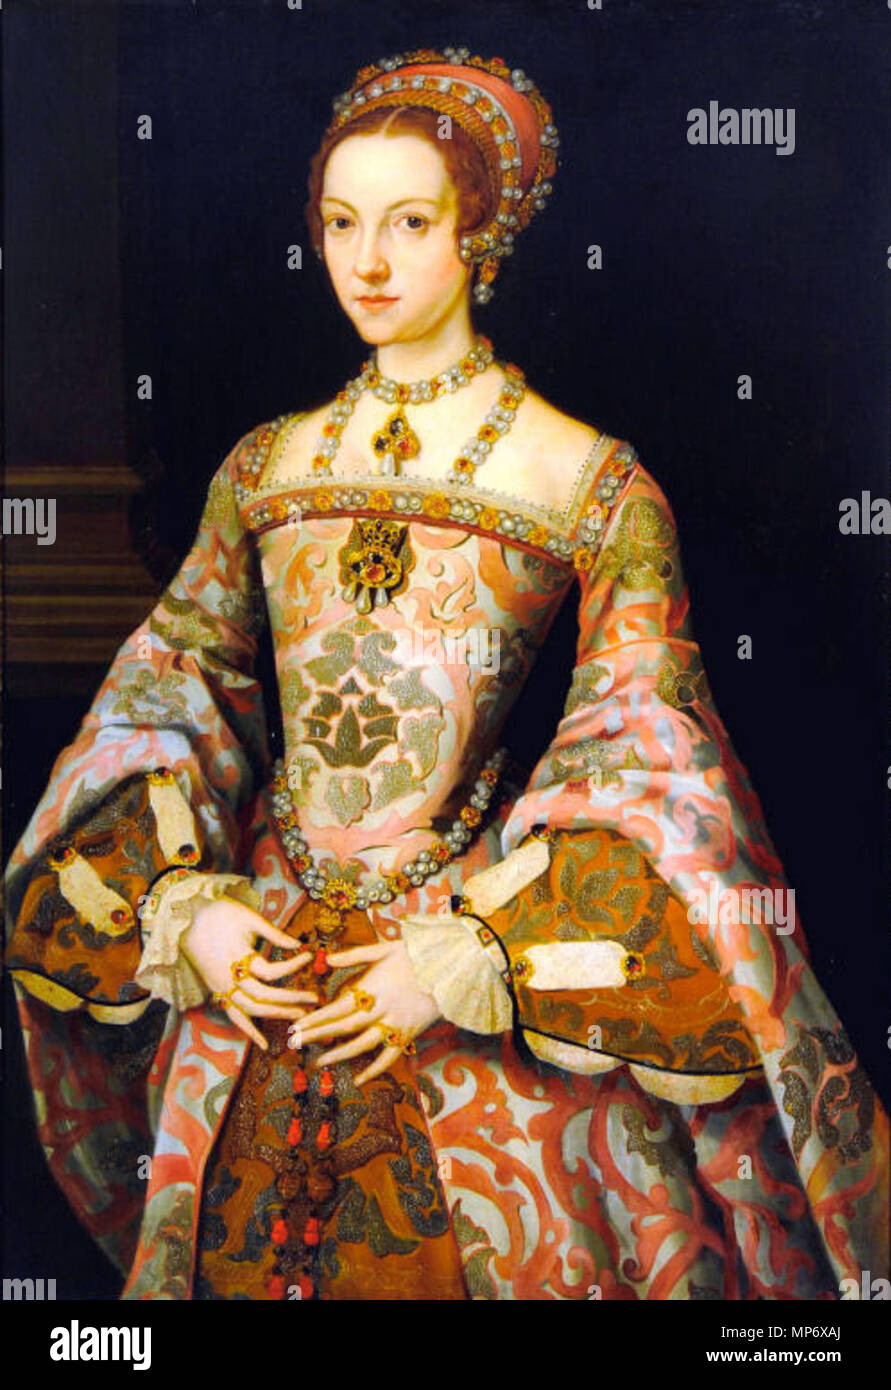 . English: Catherine Parr in the Melton Constable Portrait. Formerly mistaken as Jane Grey. 16th century. Unknown 1035 Queen Catherine Parr v2 Stock Photo